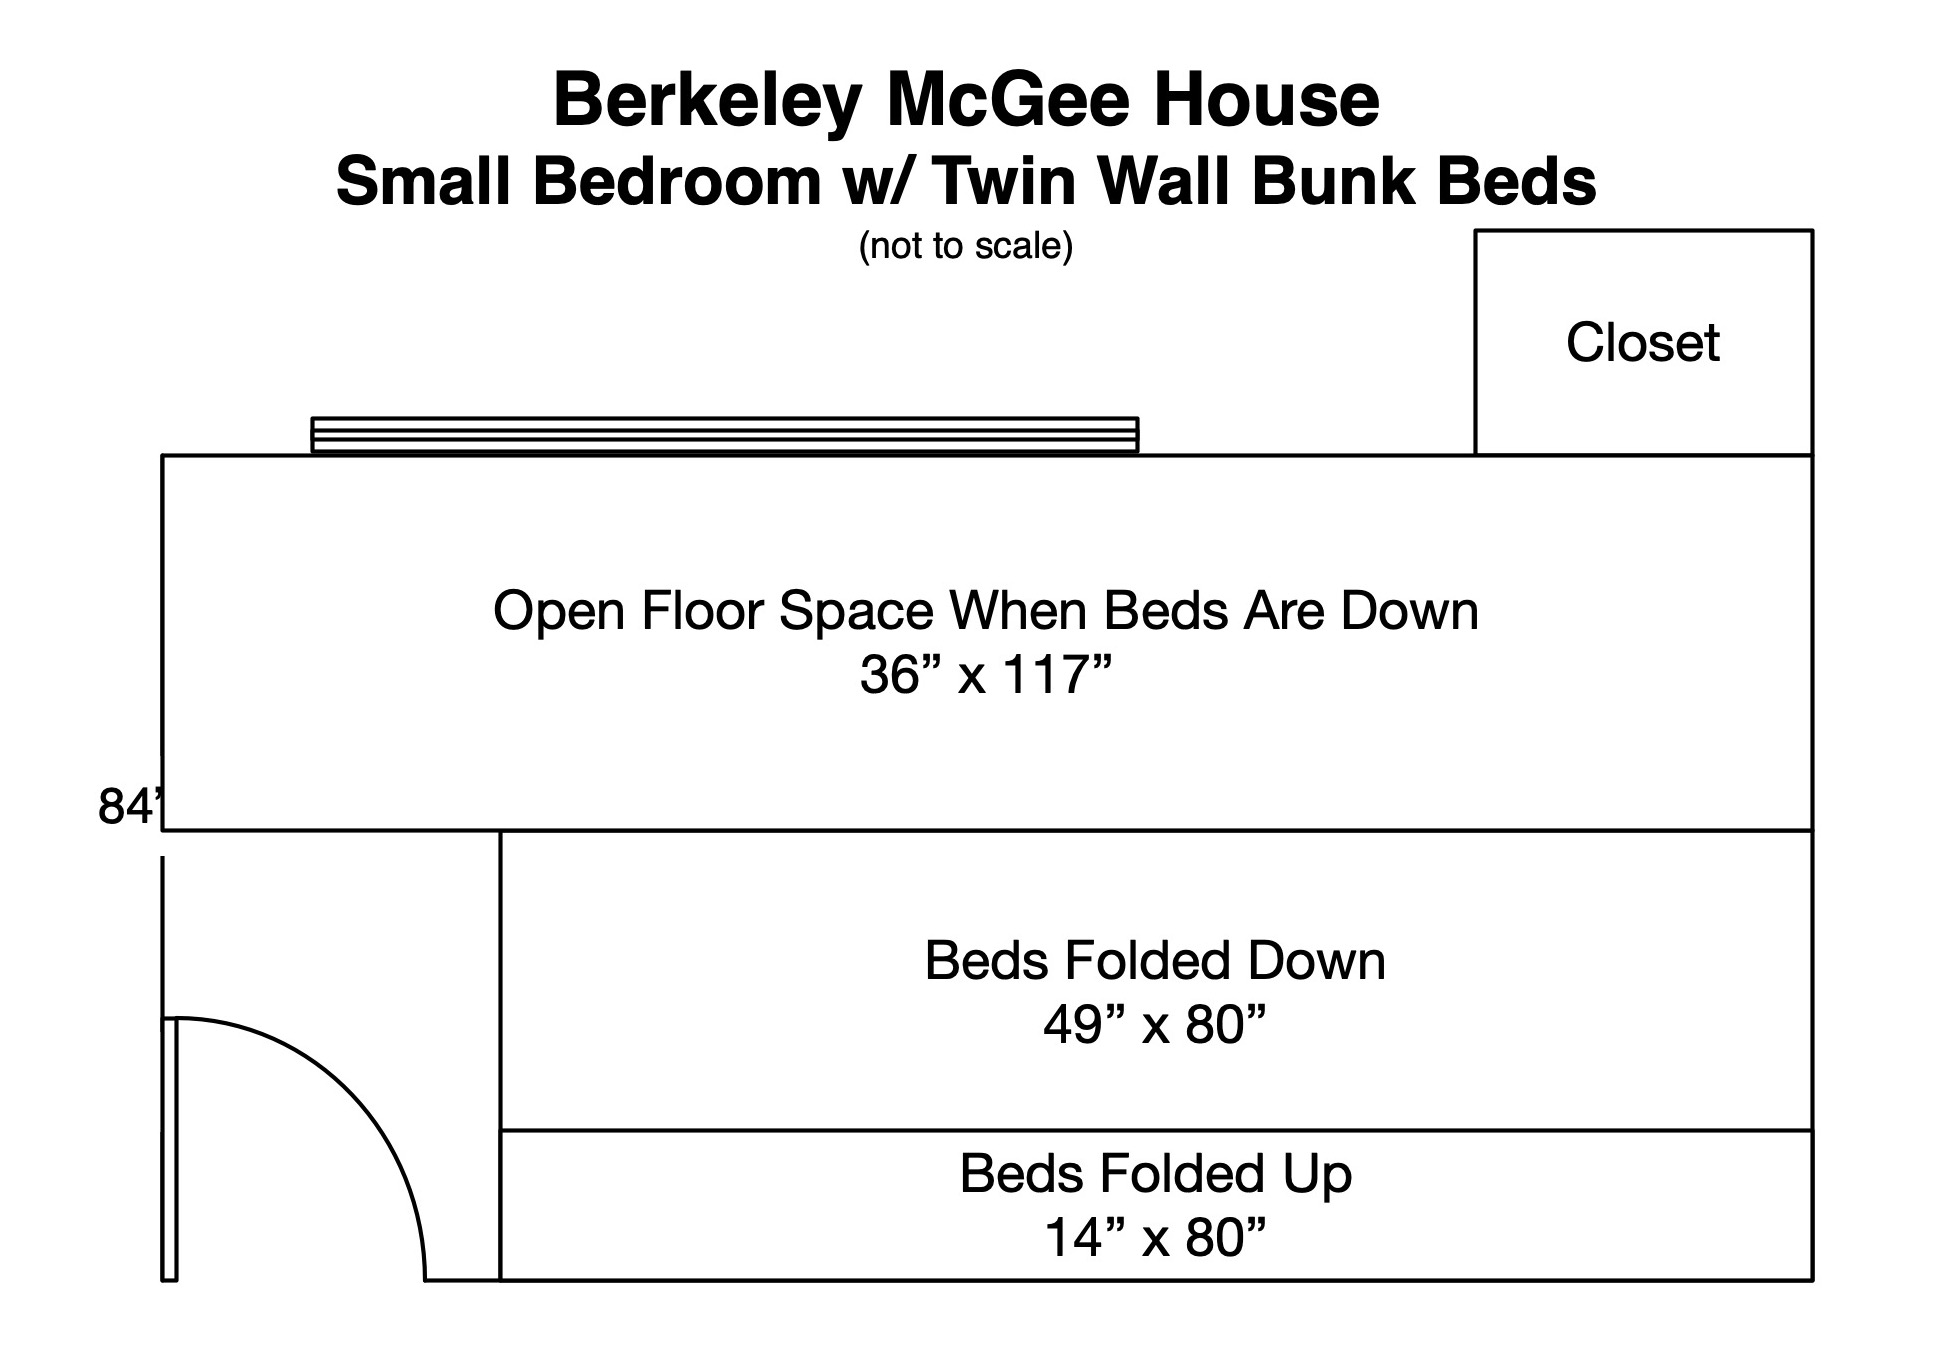 McGee House Second Bedroom Layout